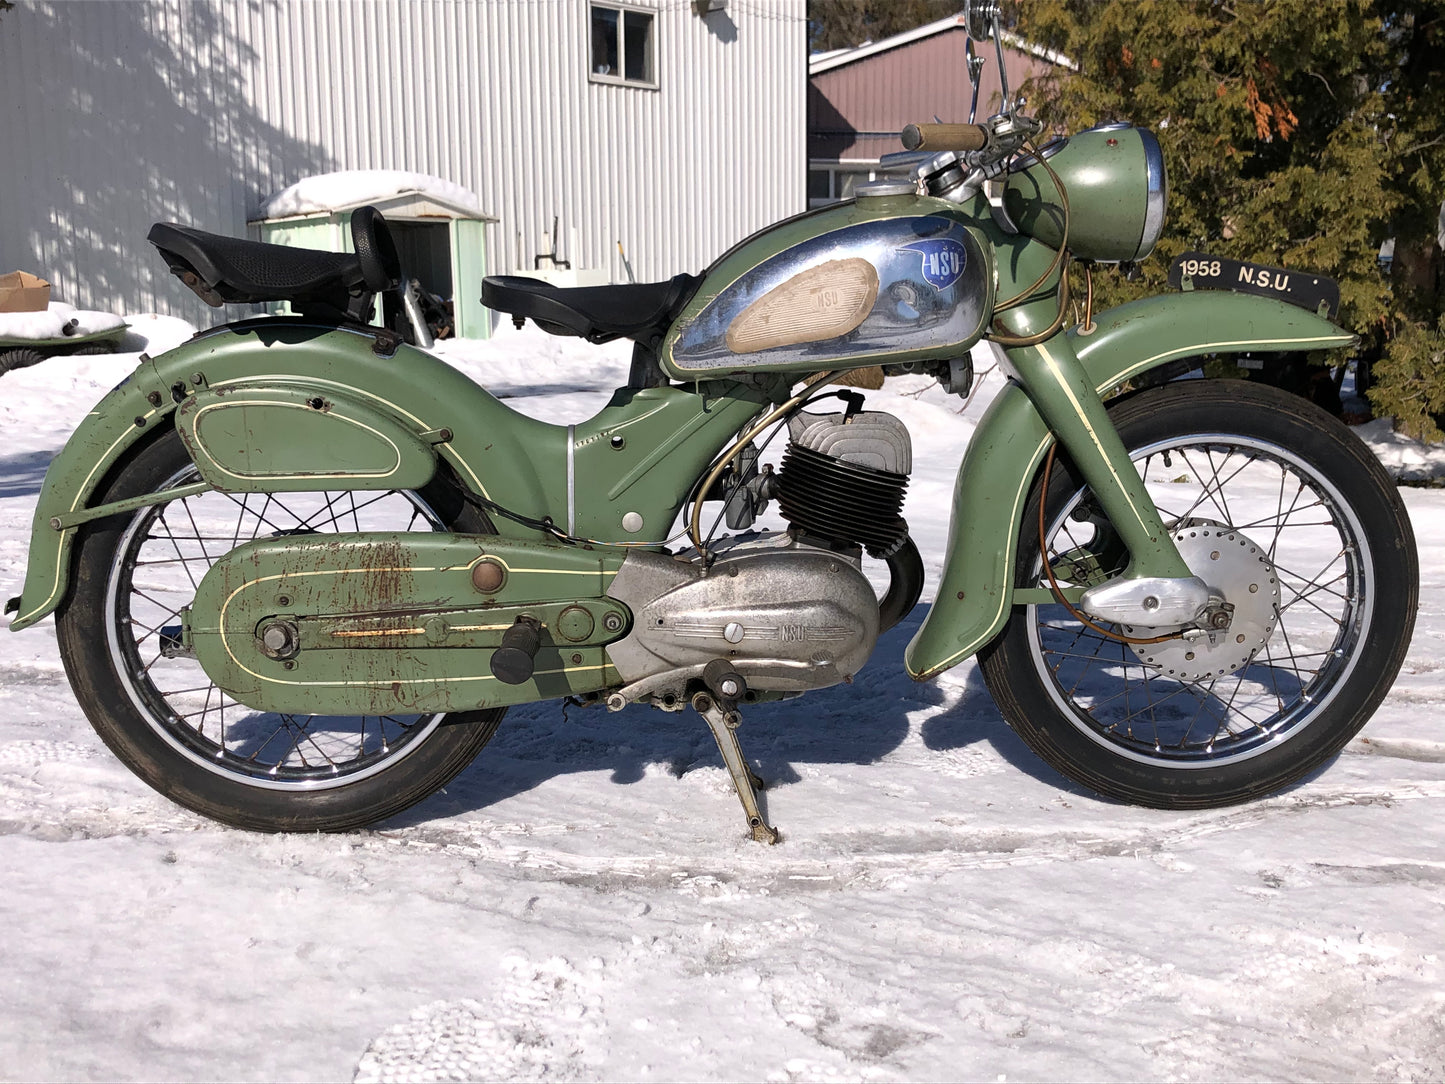 1958 NSU SUPER LUX MOTORCYCLE FOR SALE IN ORIGENAL CONDITION